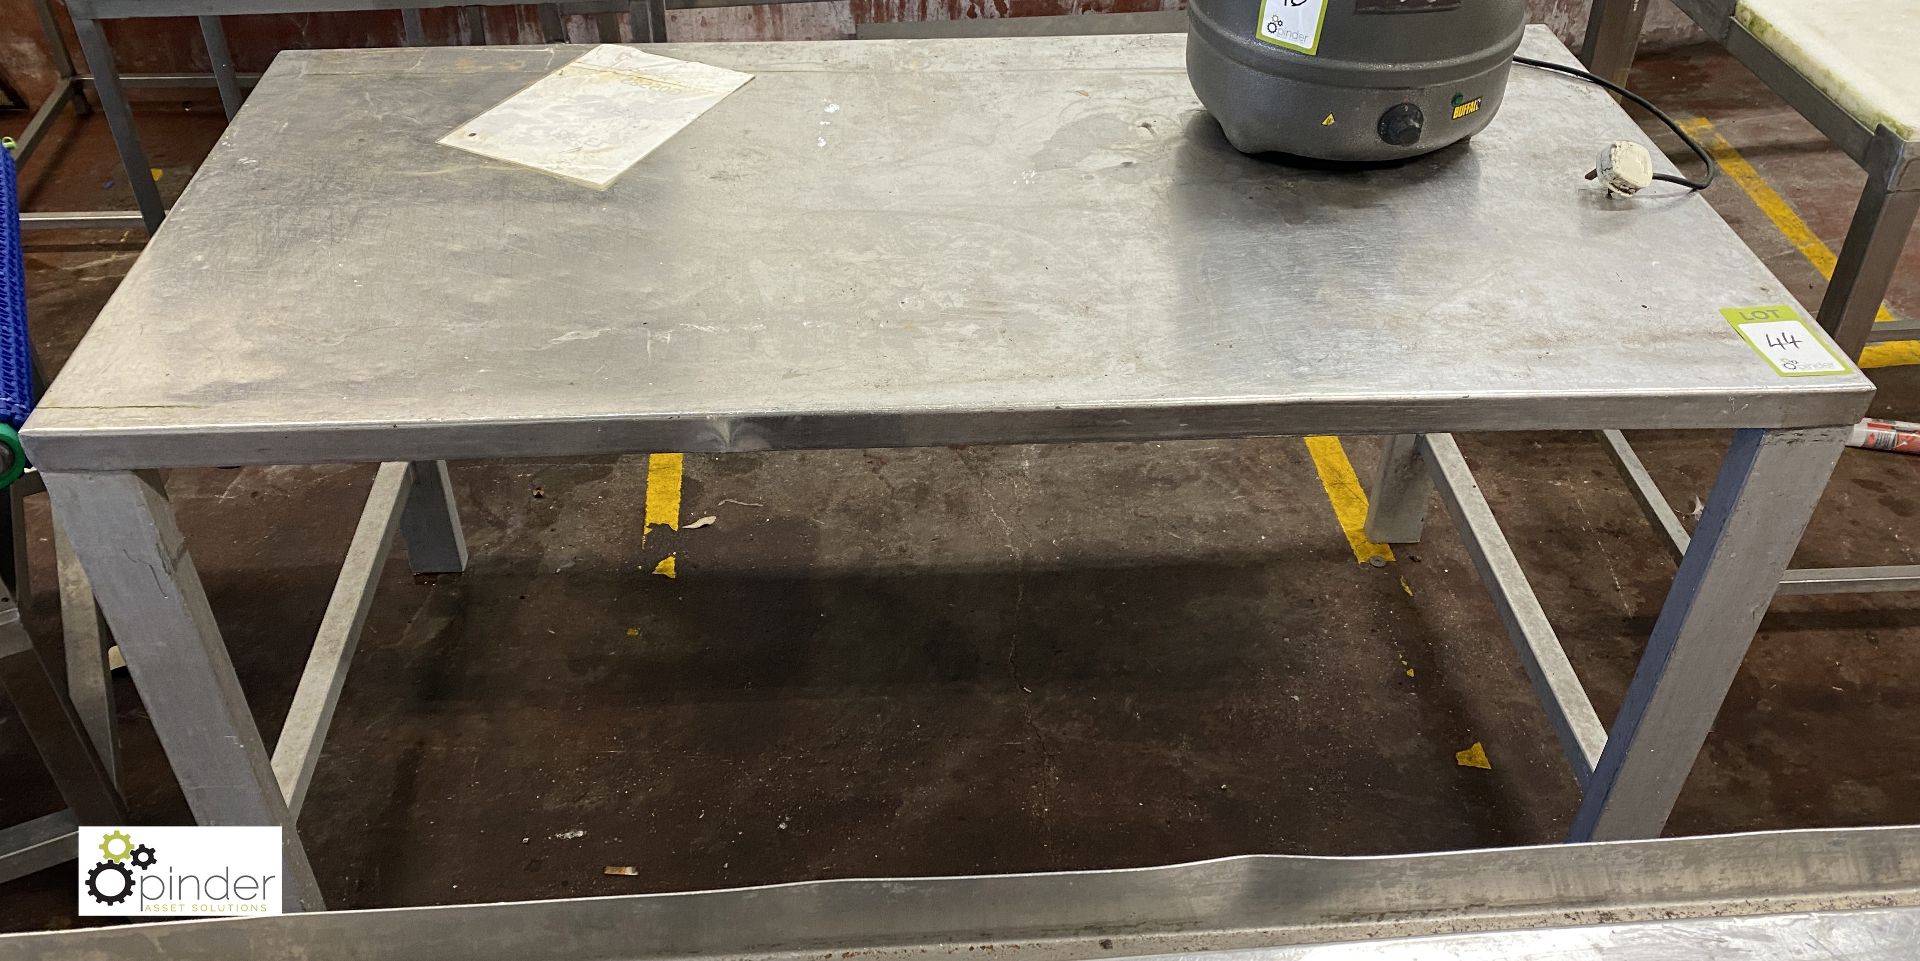 Stainless steel Preparation Table, 1530mm x 770mm x 810mm (please note there is a lift out fee of £5 - Image 2 of 2